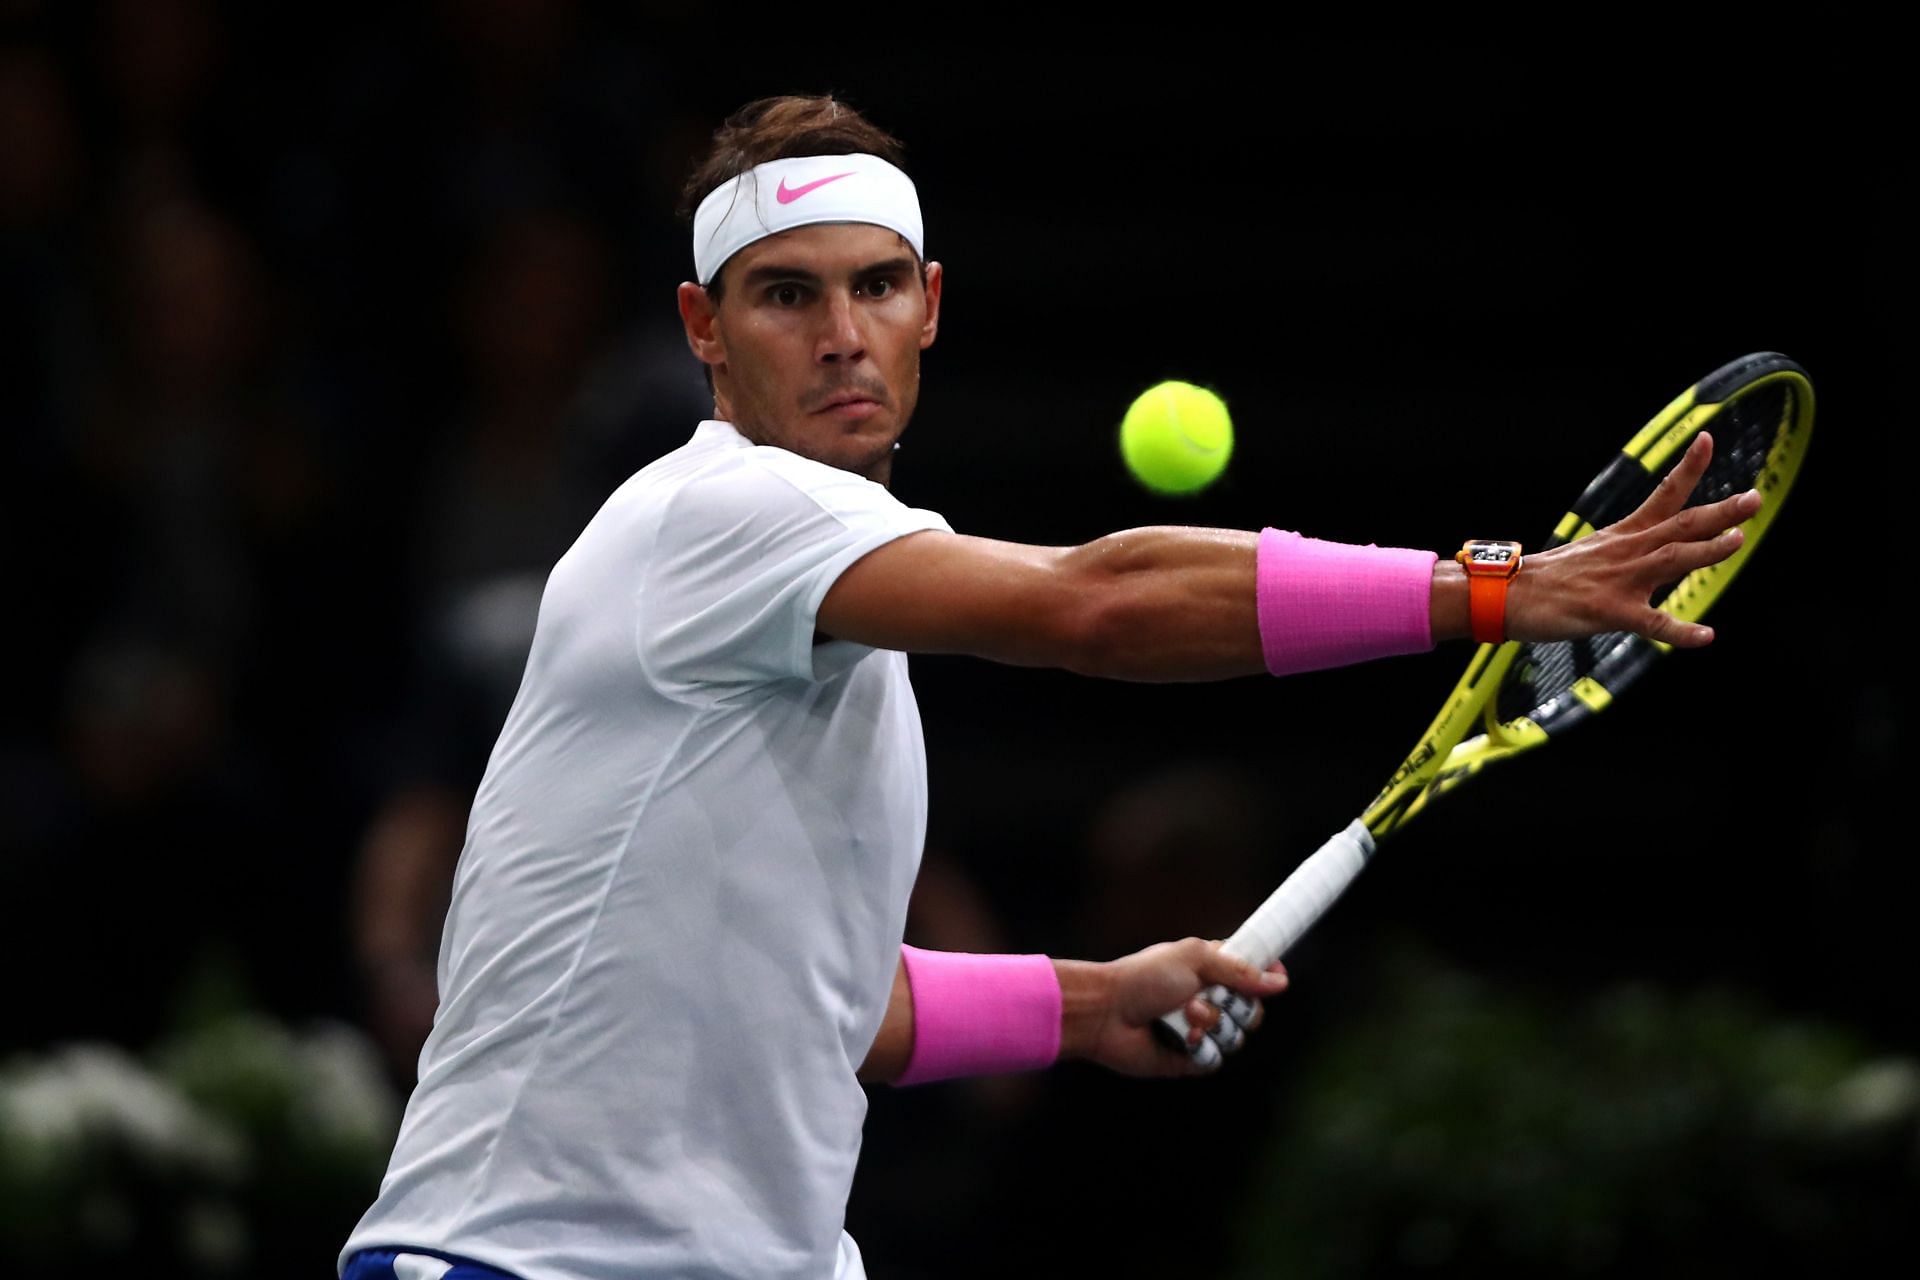 Rafael Nadal will turn his attention to the Cincinnati Open up next